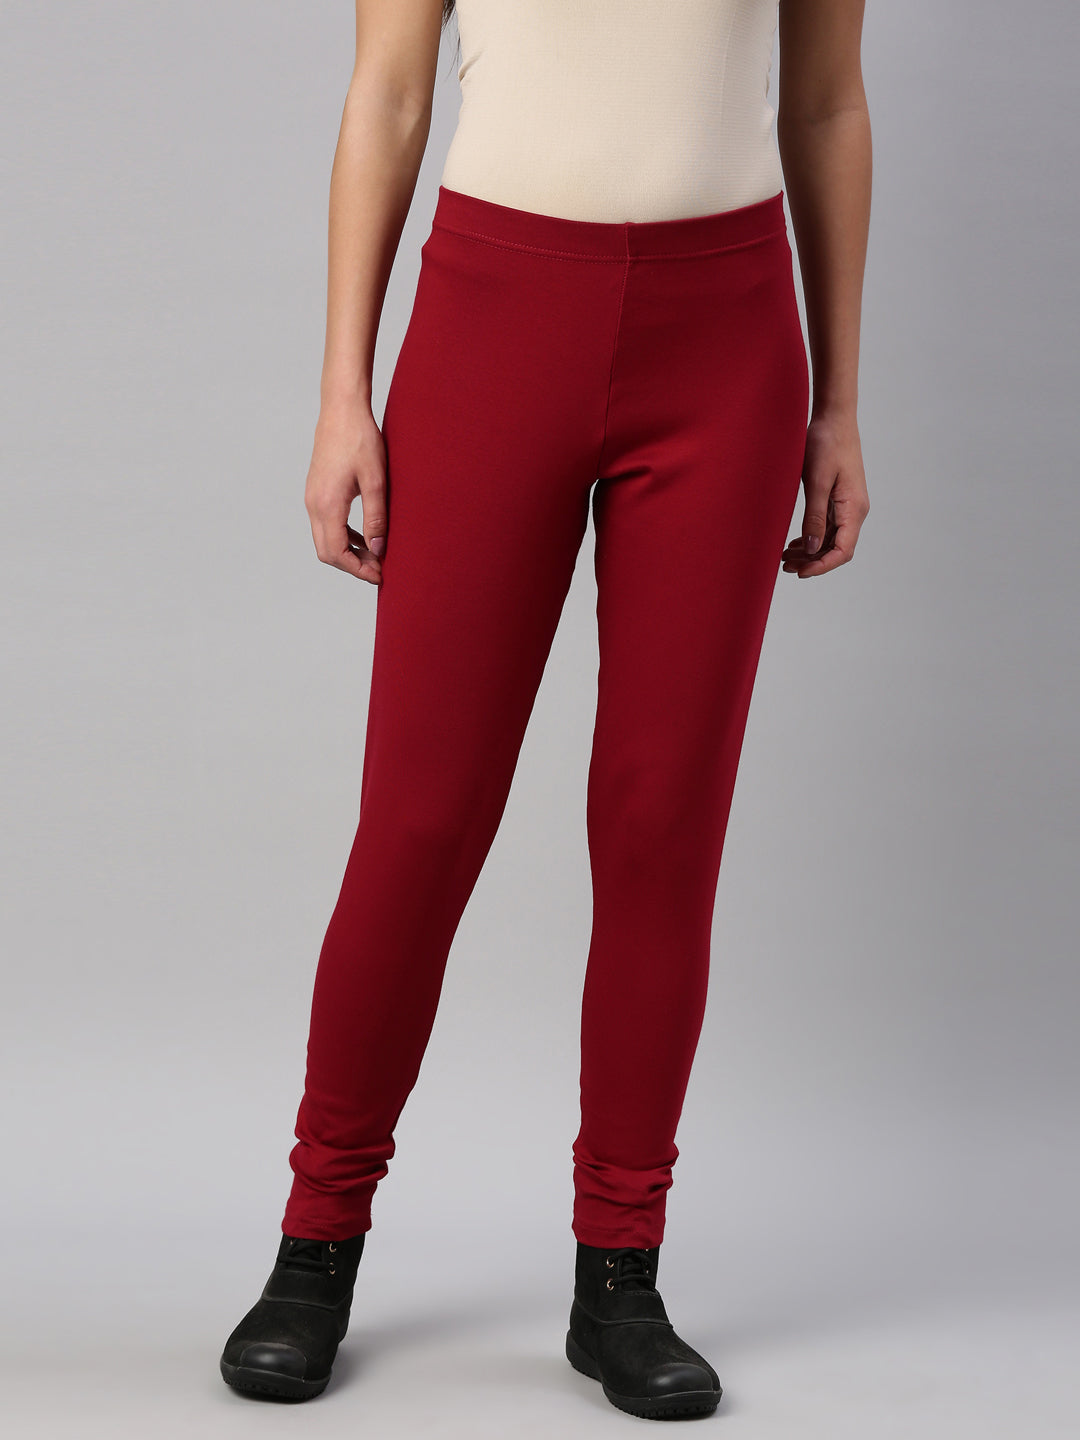 Leggings from CRZ YOGA for Women in Red| Stylight